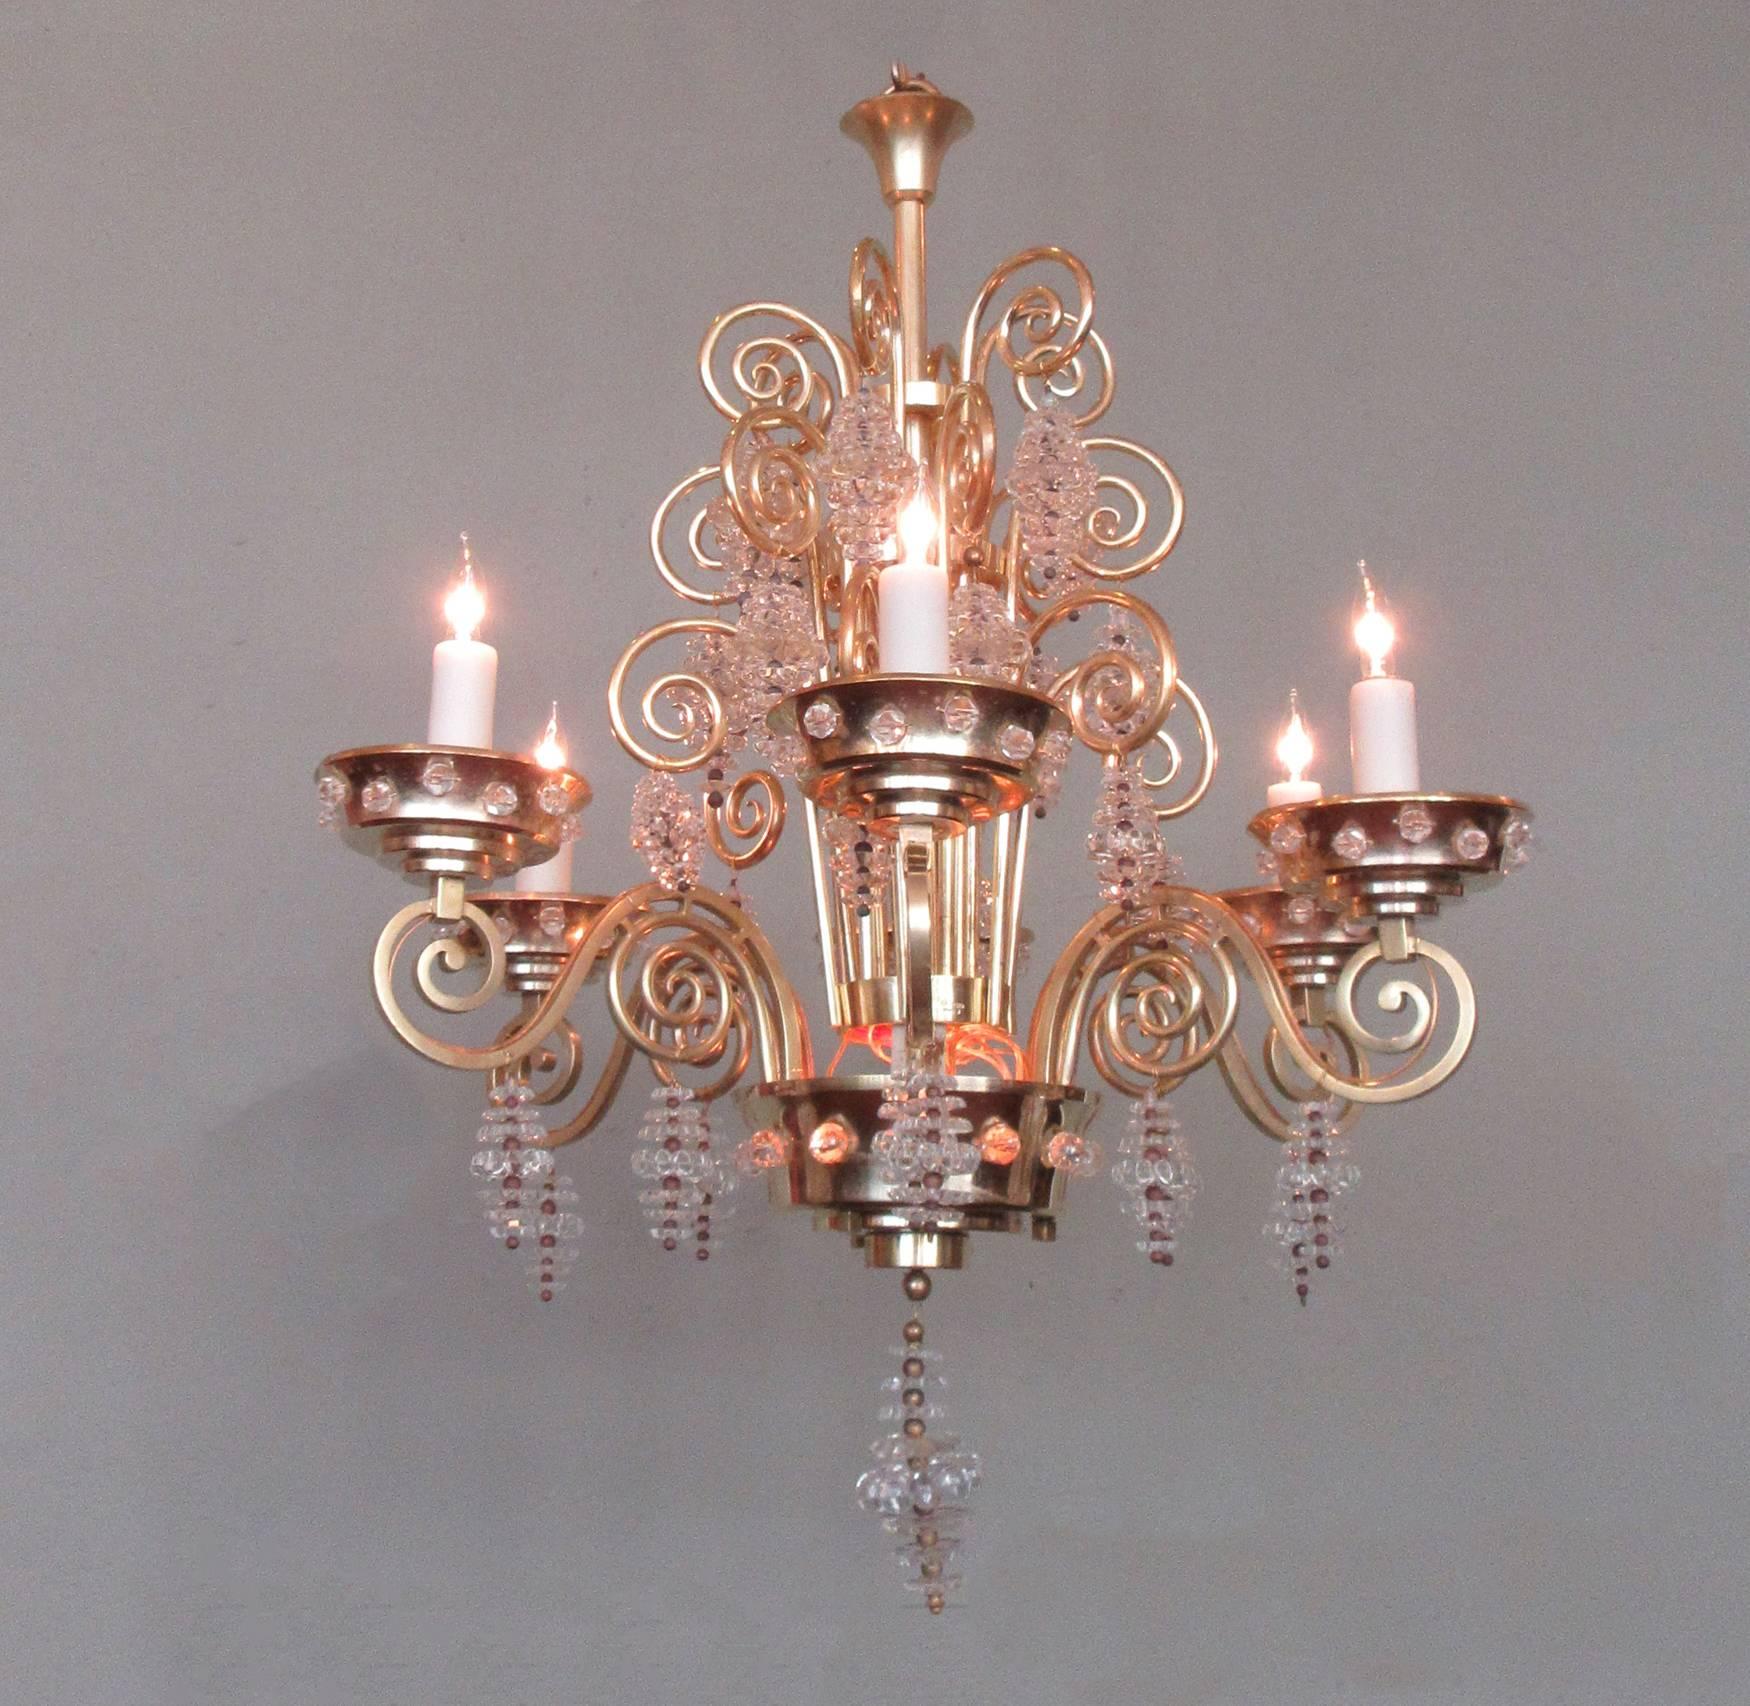 An early 20th century French Art Deco bronze chandelier, circa 1920, by famous glass artist and chandelier maker Marius-Ernst Sabino. The chandelier features six swirling bronze arms with large tiered bronze bobeches adorned with glass beads and is